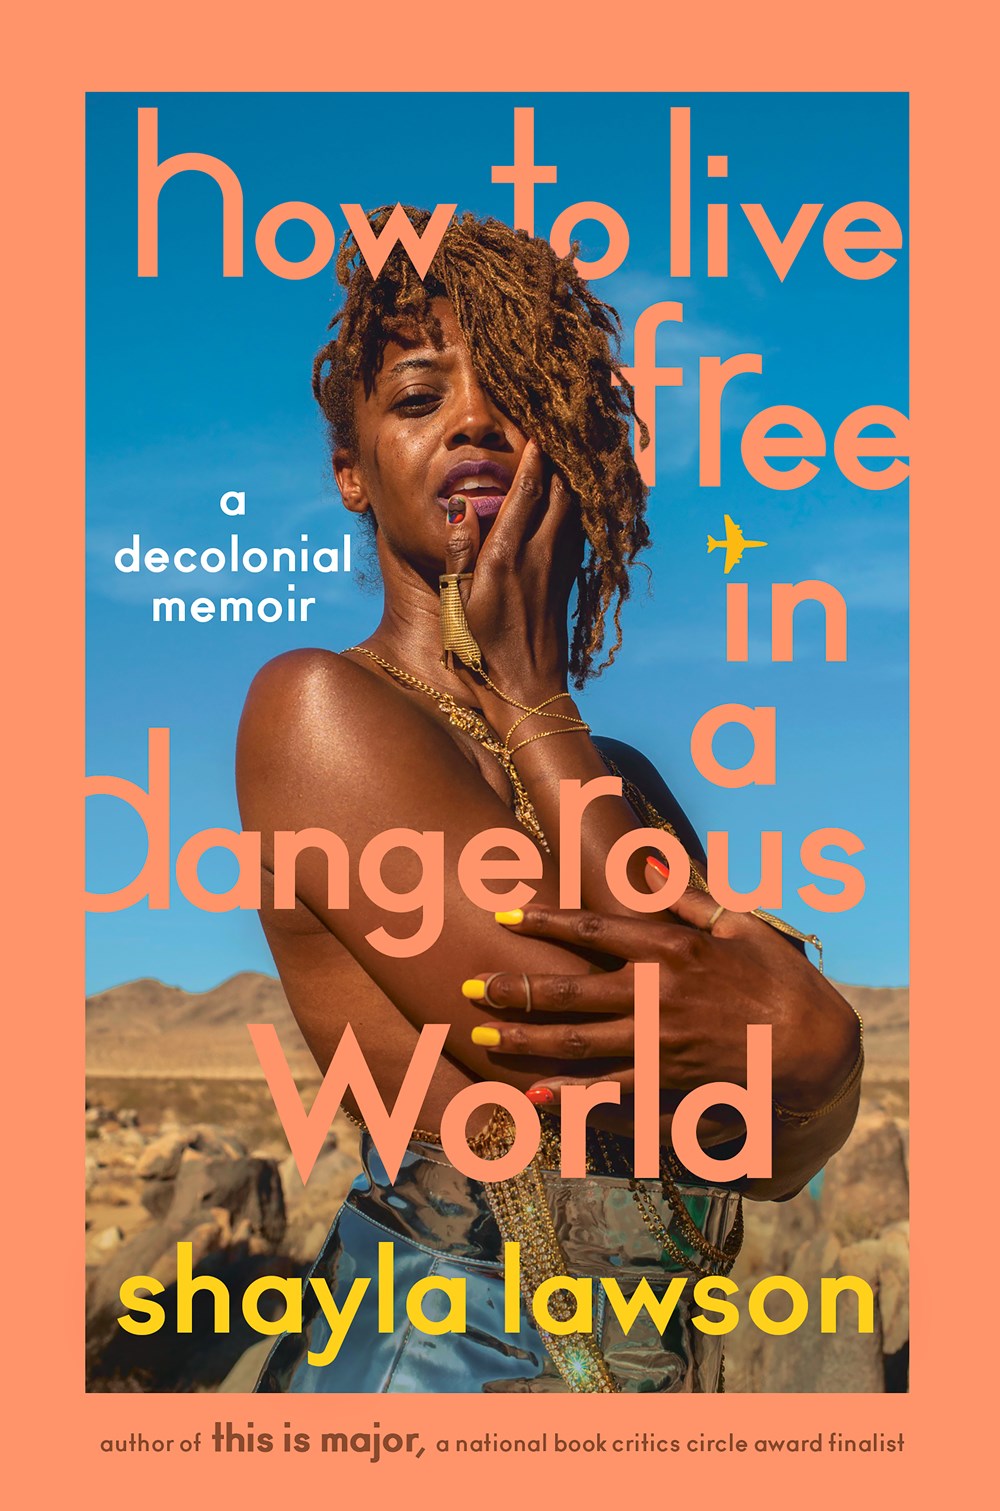 How to Live Free in a Dangerous World: A Decolonial Memoir by Shayla Lawson (2/6/24)